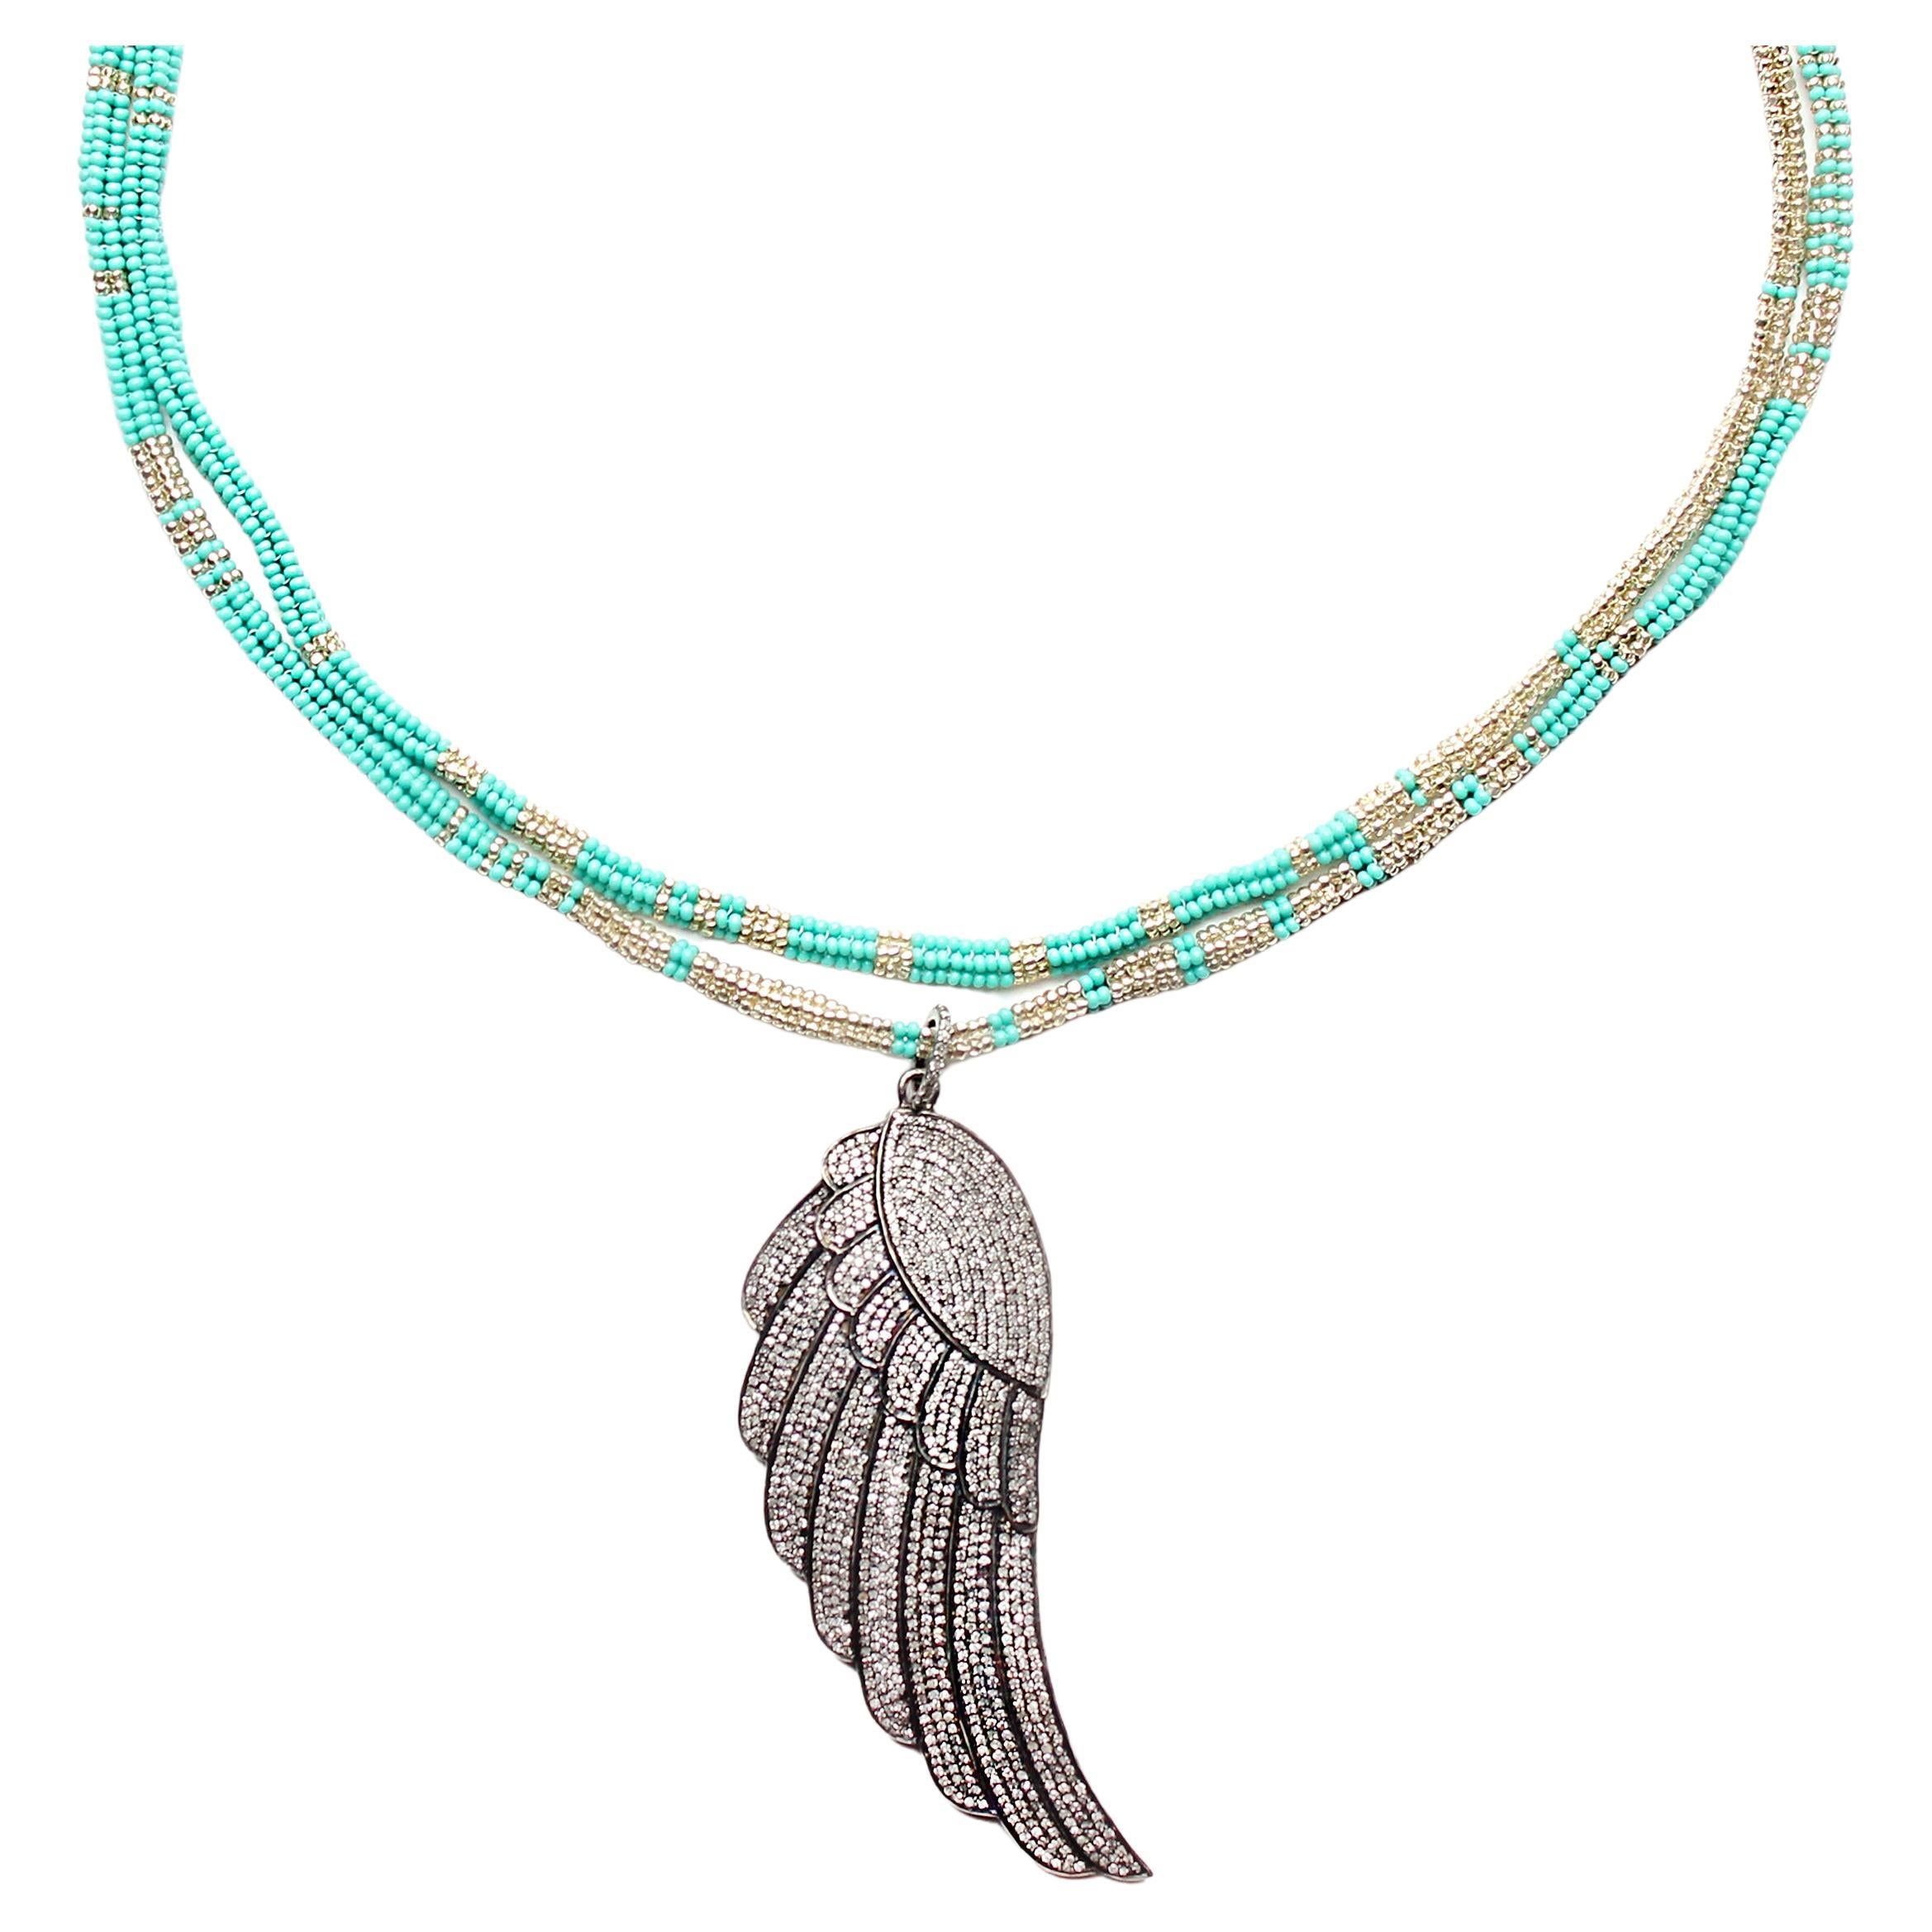 CLARISSA BRONFMAN Turquoise Silver "Alonso" Necklace & Large Diamond Angel Wing For Sale